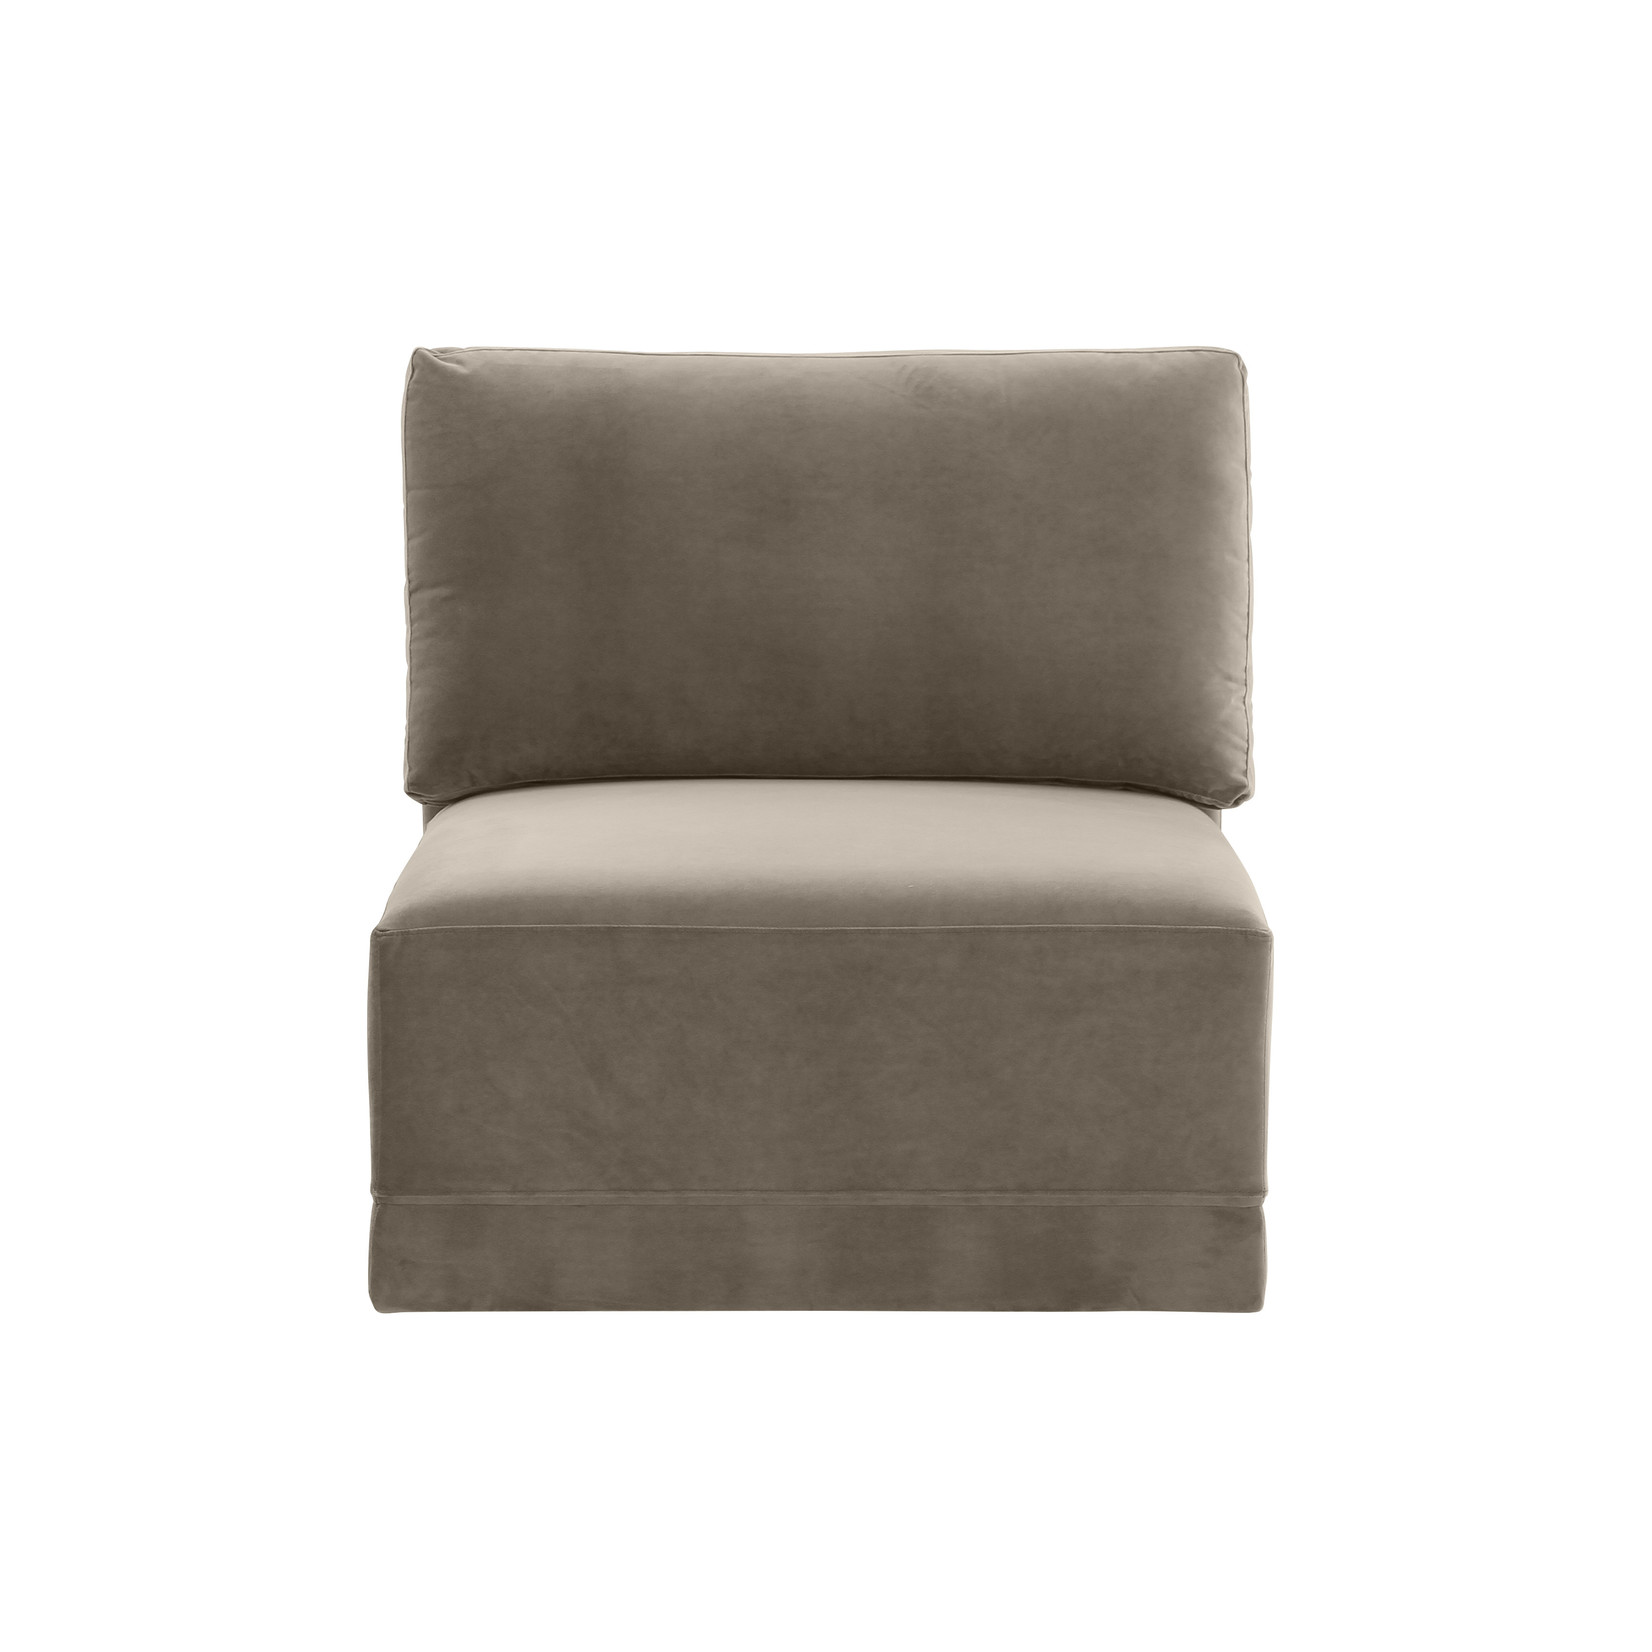 Tov WILLOE TAUPE ARMLESS CHAIR